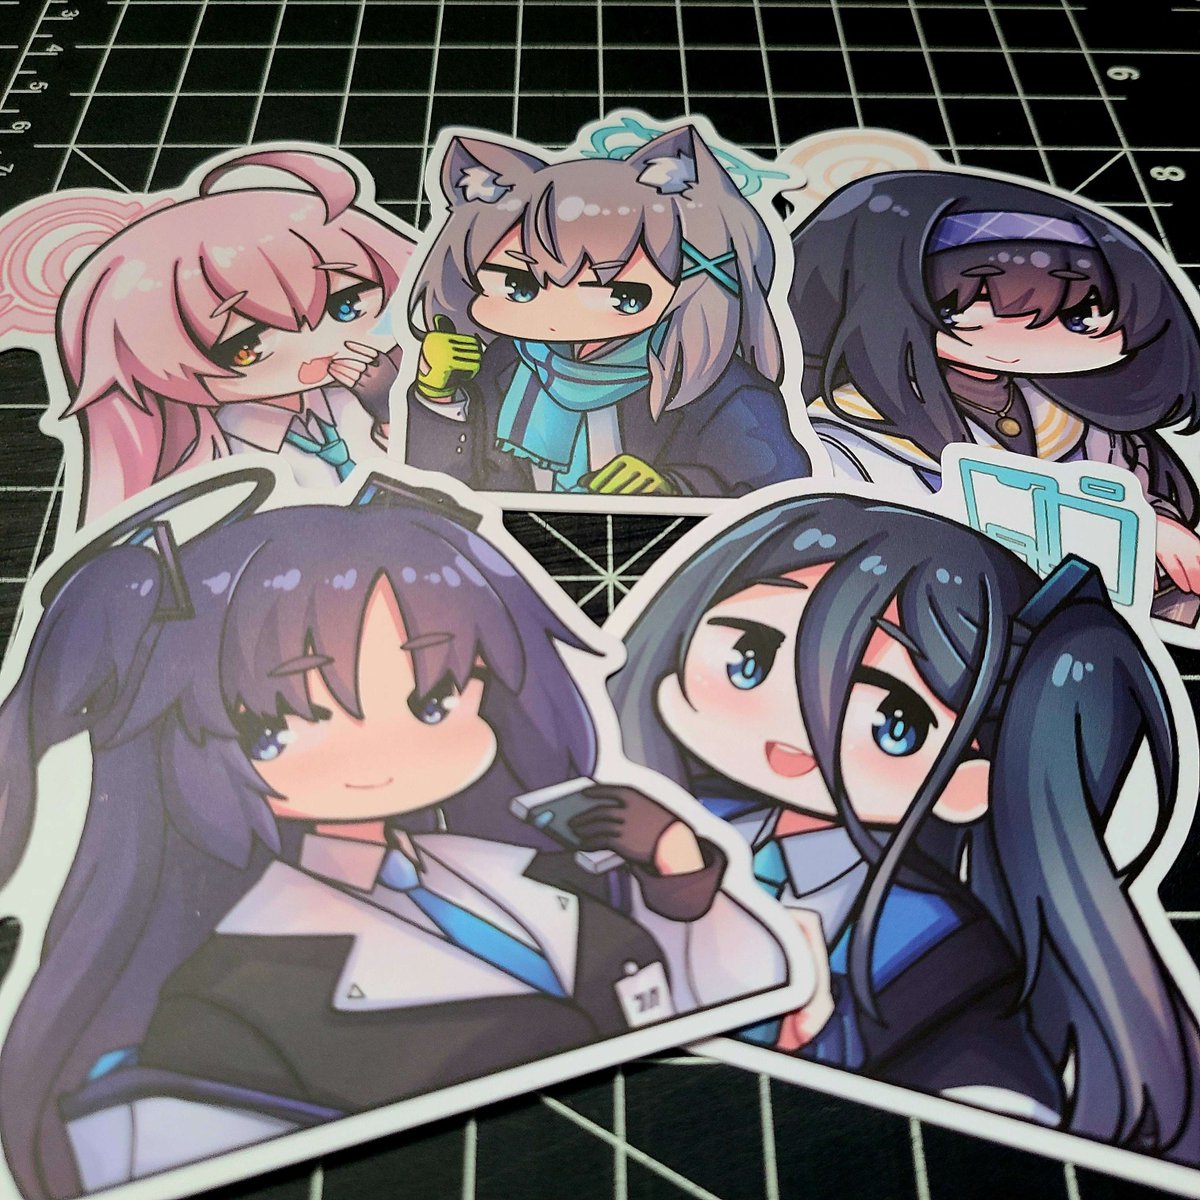 Hey Senseis! 
New Blue Archive vinyl stickers are available now @ https://t.co/a9Av3rBNa4
先生方、お待たせしました。
新しいブルーアーカイブのビニールステッカーが発売されました!@ https://t.co/a9Av3rBNa4 